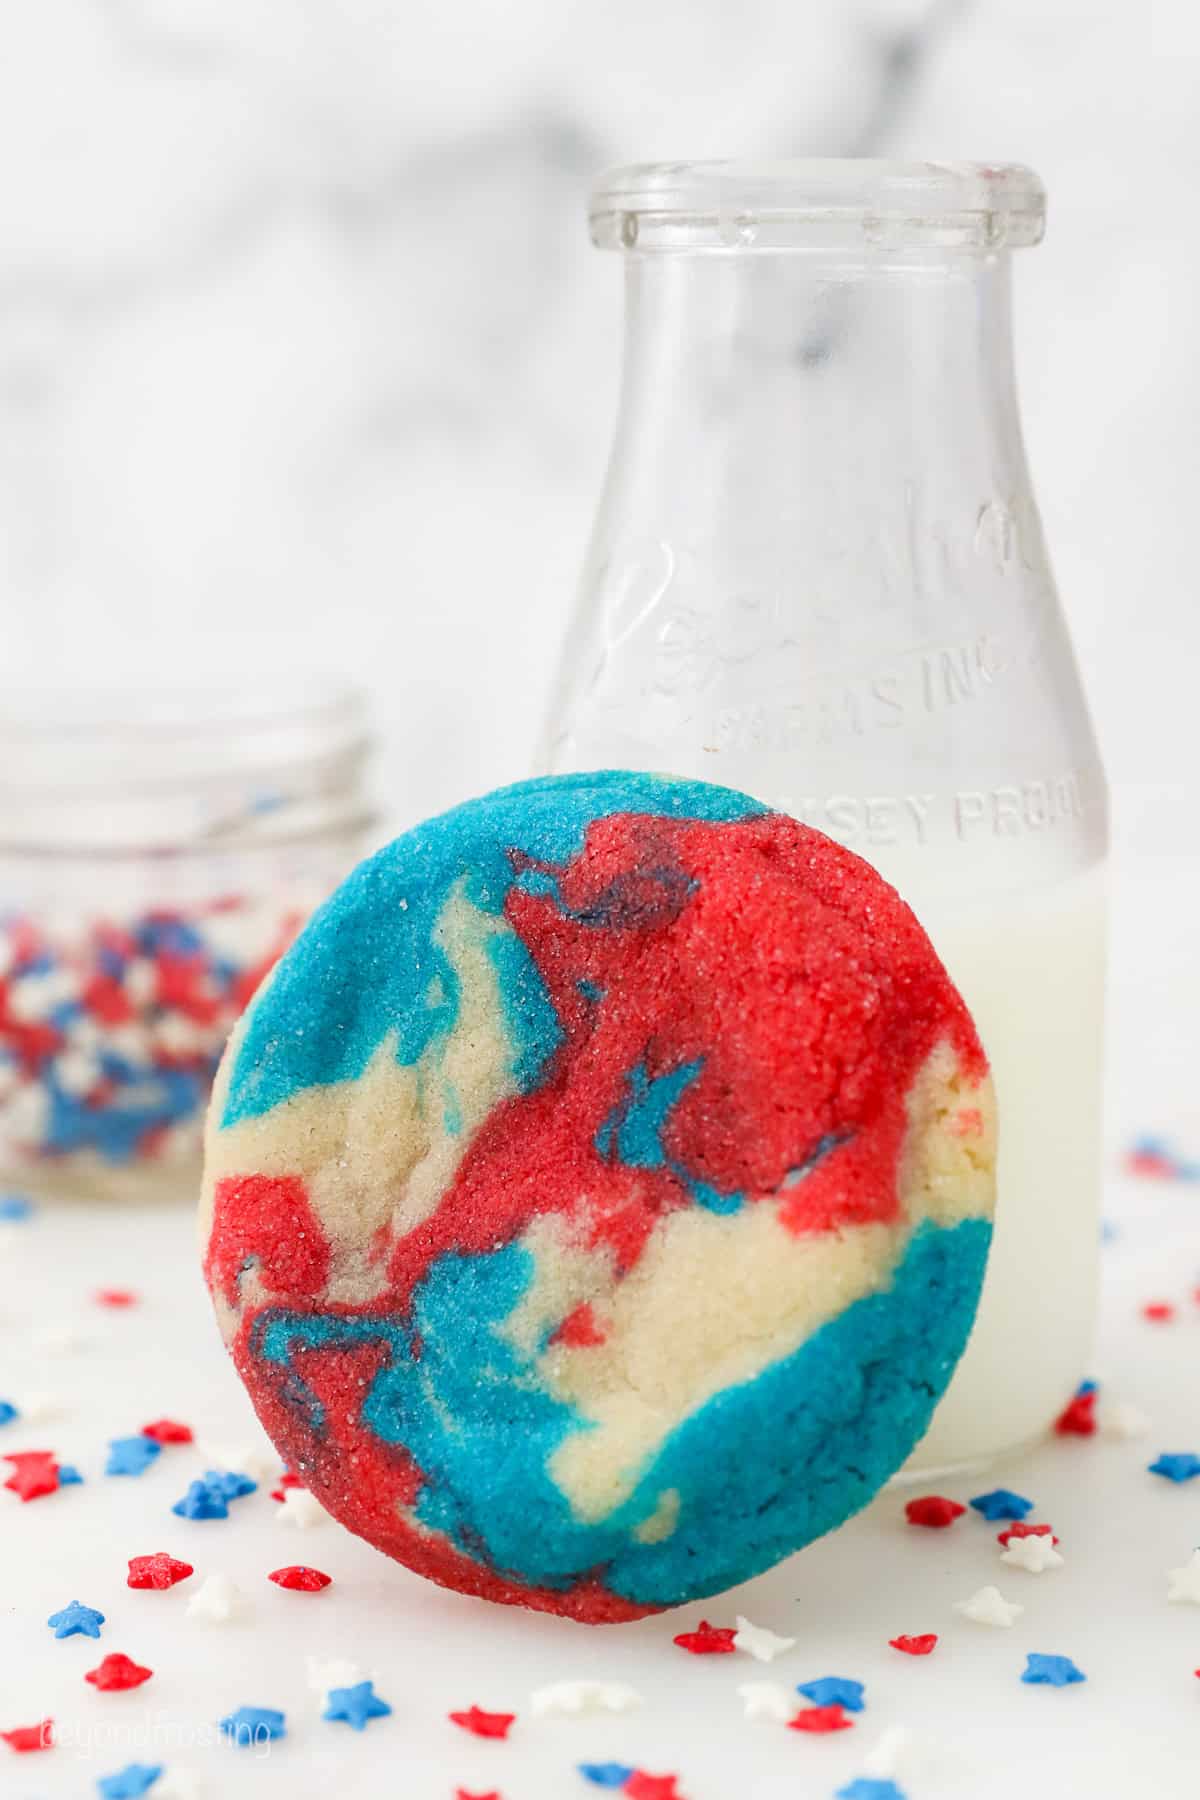 A patriotic sugar cookie propped up against a jug of milk surrounded by red, white, and blue confetti.